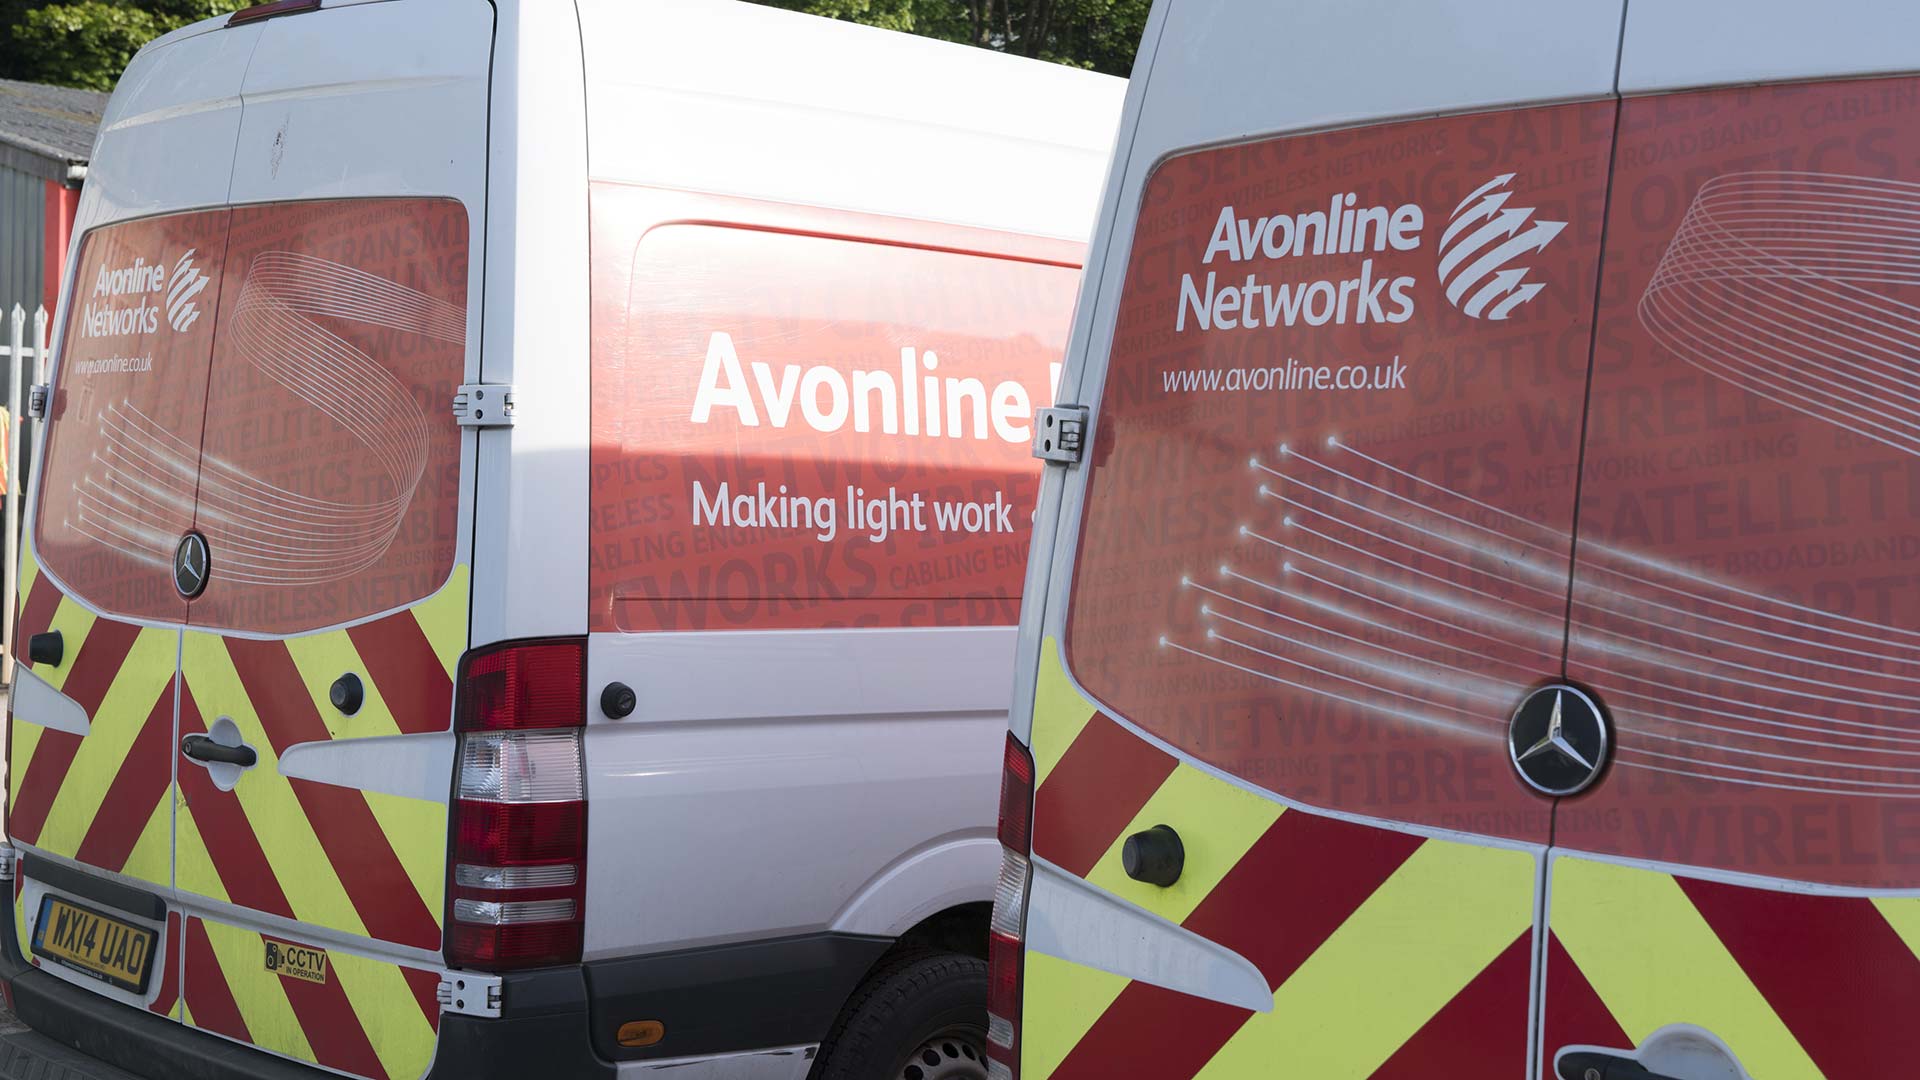 M GROUP SERVICES EXPANDS TELECOMS PRESENCE WITH ACQUISITION OF AVONLINE NETWORKS